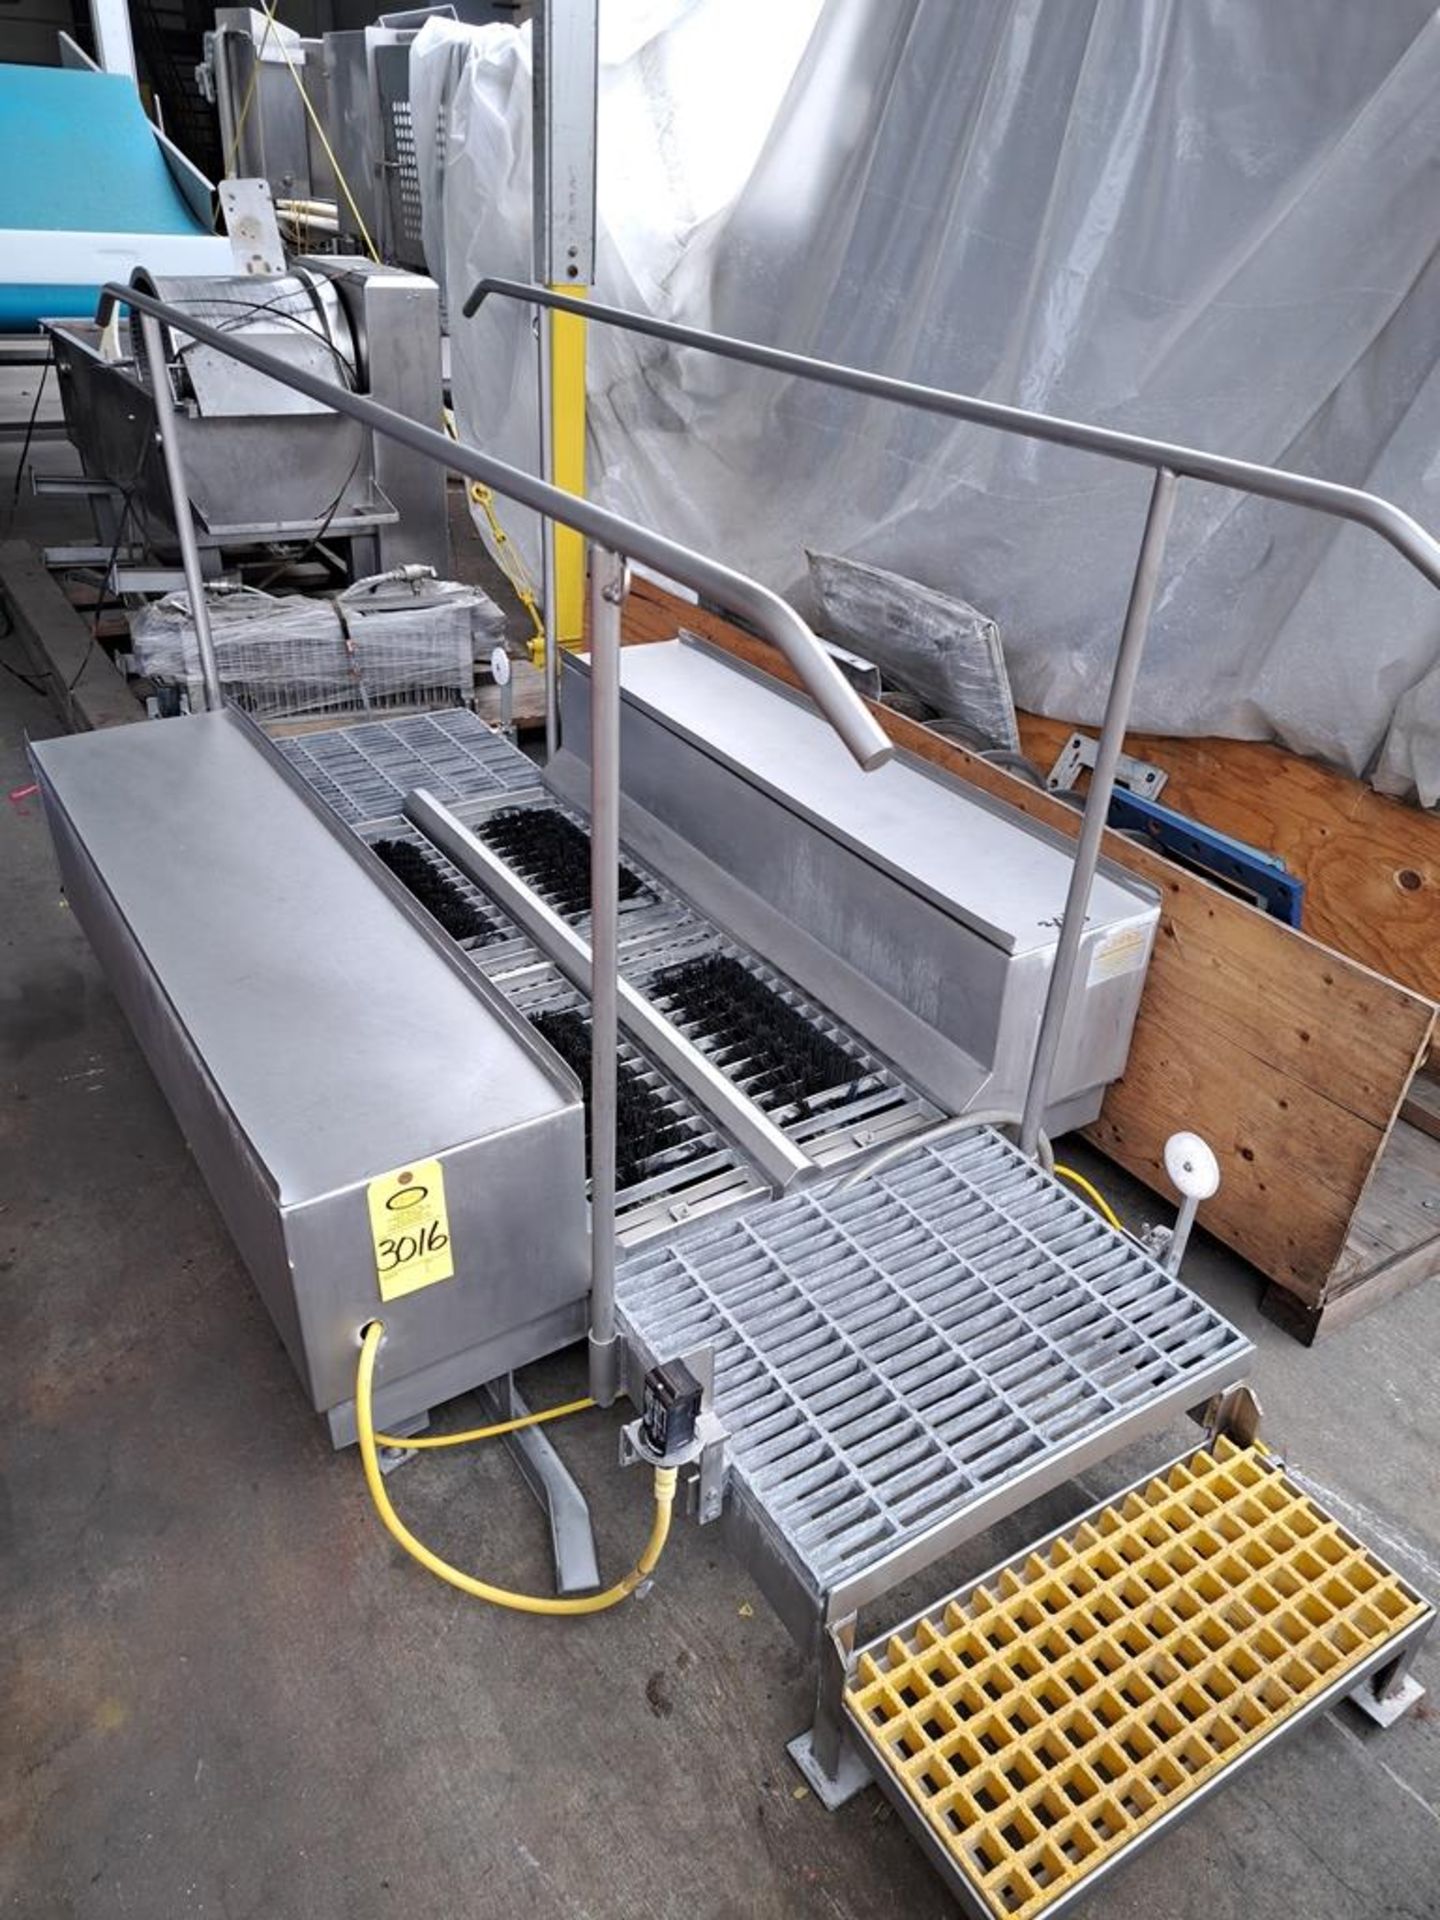 Chad Stainless Steel Boot Wash Conveyor, (4) motorized brushes, 4' W X 9' L overall (Contact Norm